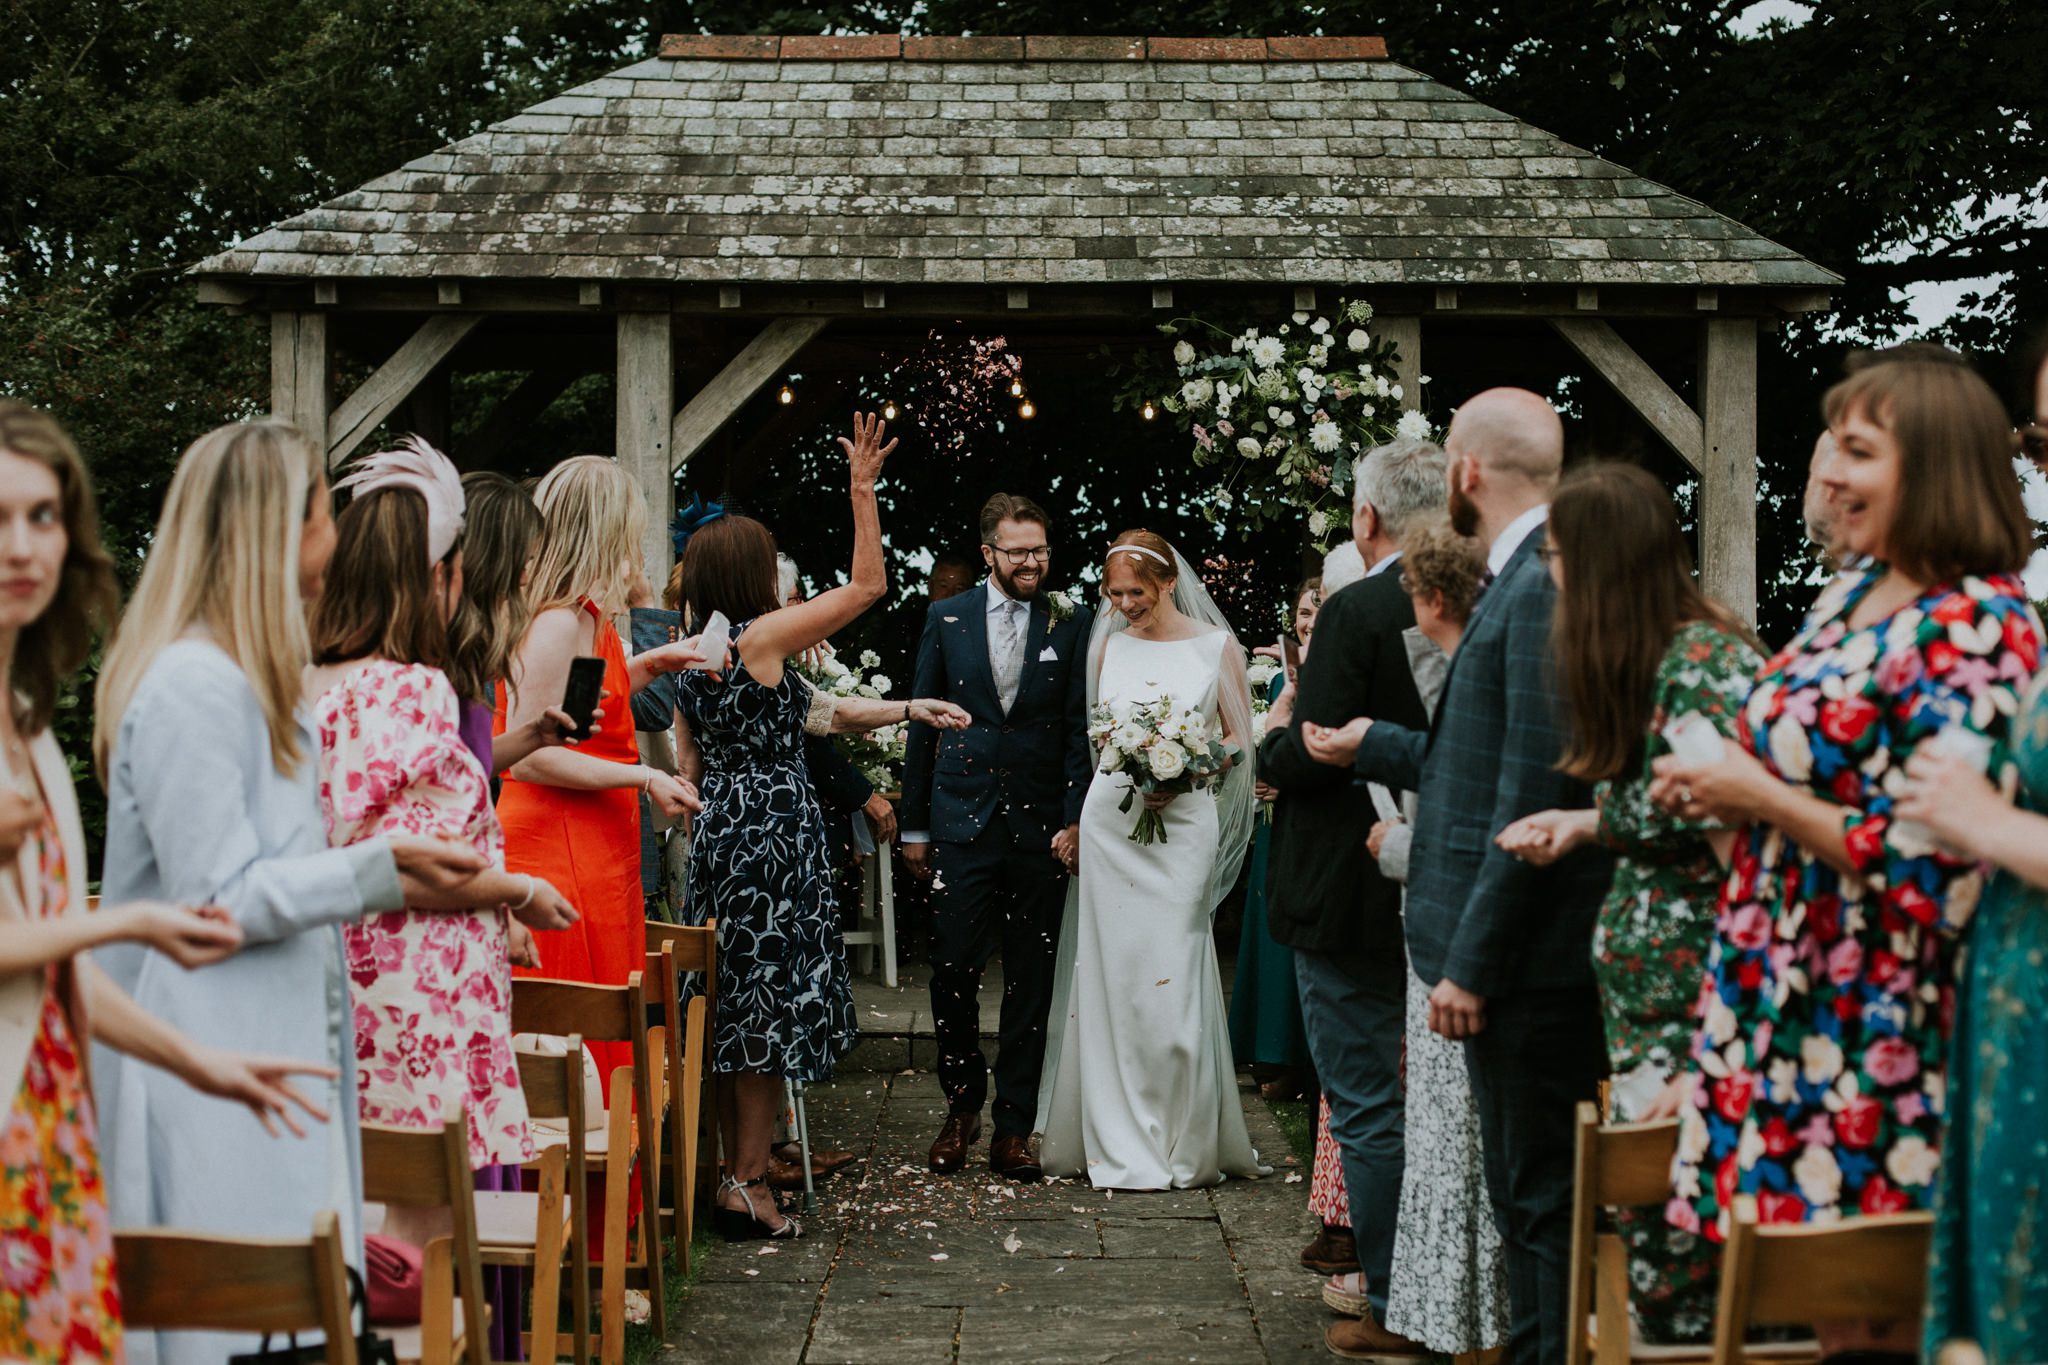 Wedding guests throw confetti for the bride and groom at a wedding ceremony at Trevenna Barns in Cornwall